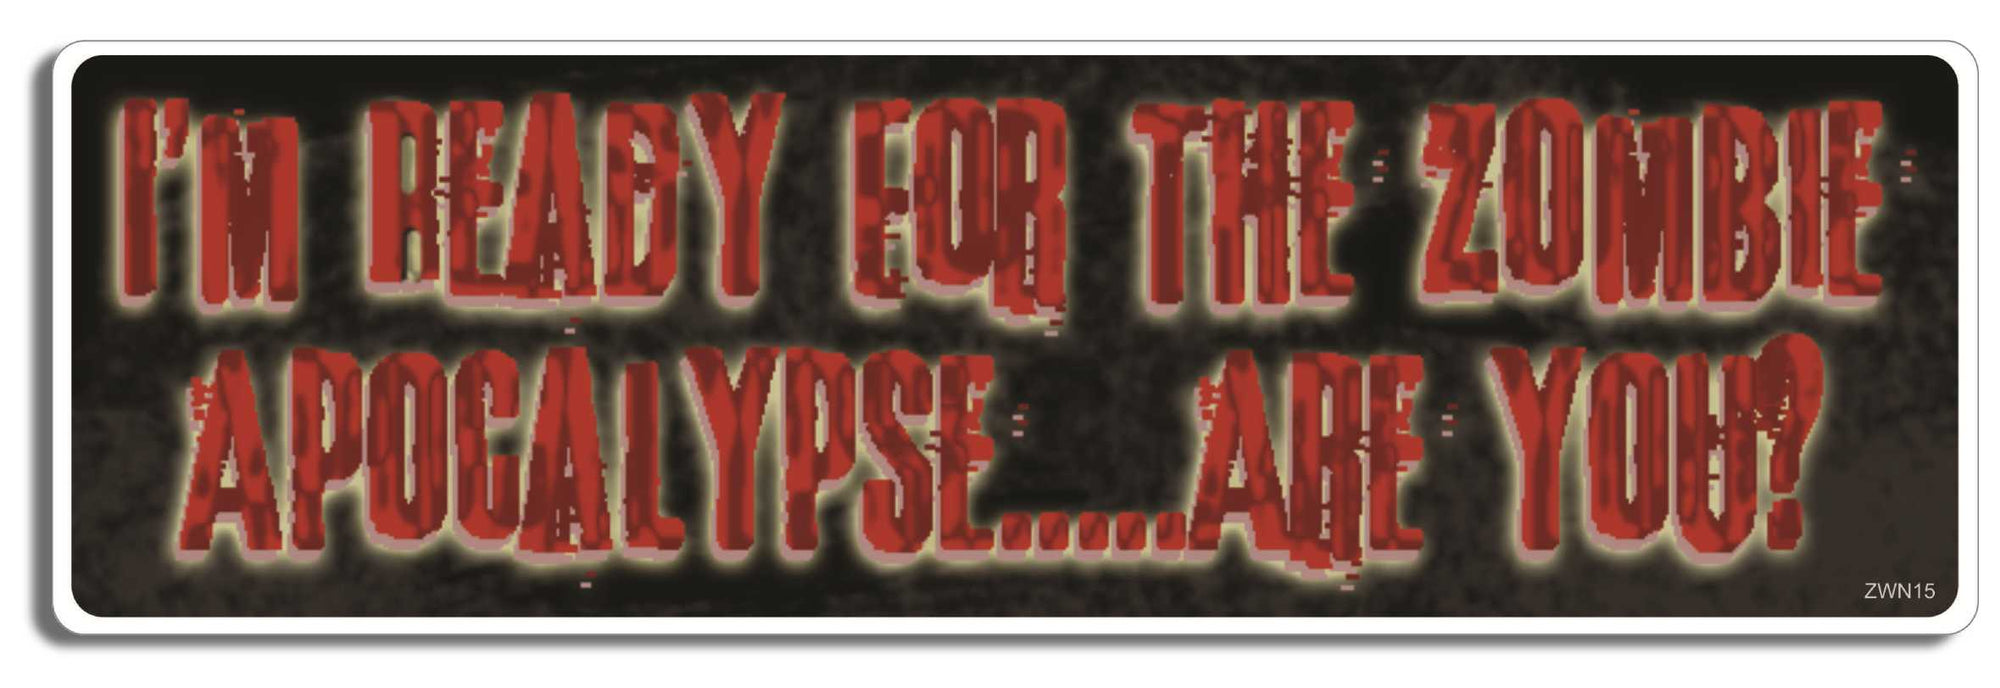 I'm ready for the zombie apocalypse...are you? - 3" x 10" Bumper Sticker--Car Magnet- -  Decal Bumper Sticker-zombie Bumper Sticker Car Magnet I'm ready for the zombie apocalypse...are-  Decal for carswalking dead, zombies